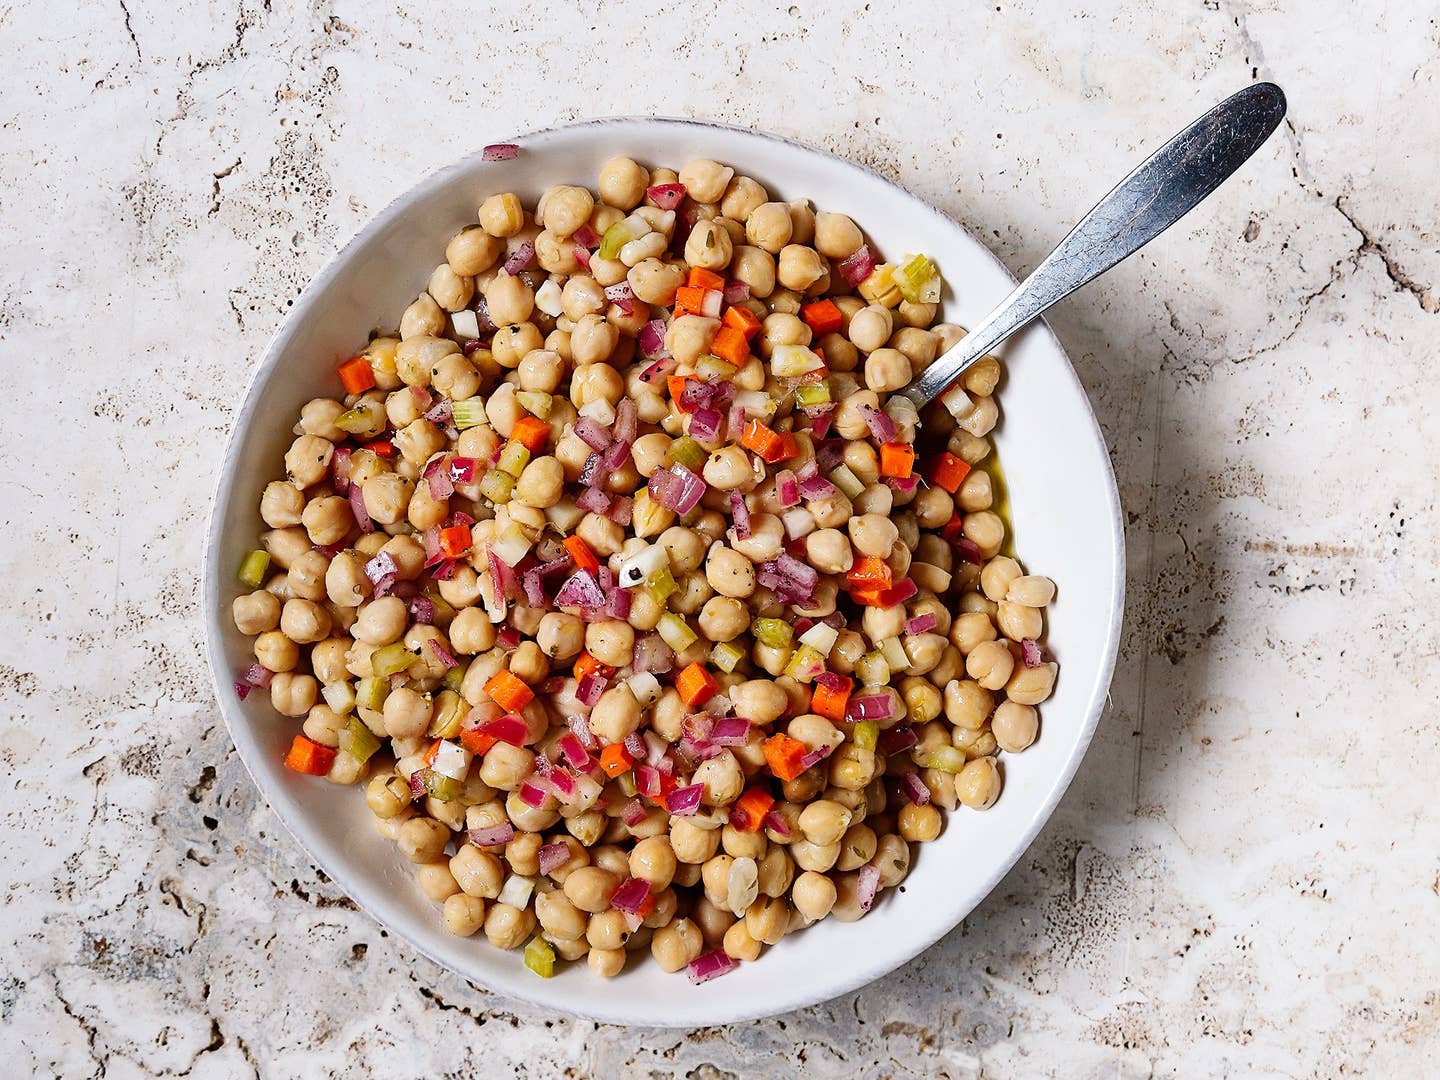 How to Make the Most of Your Chickpeas